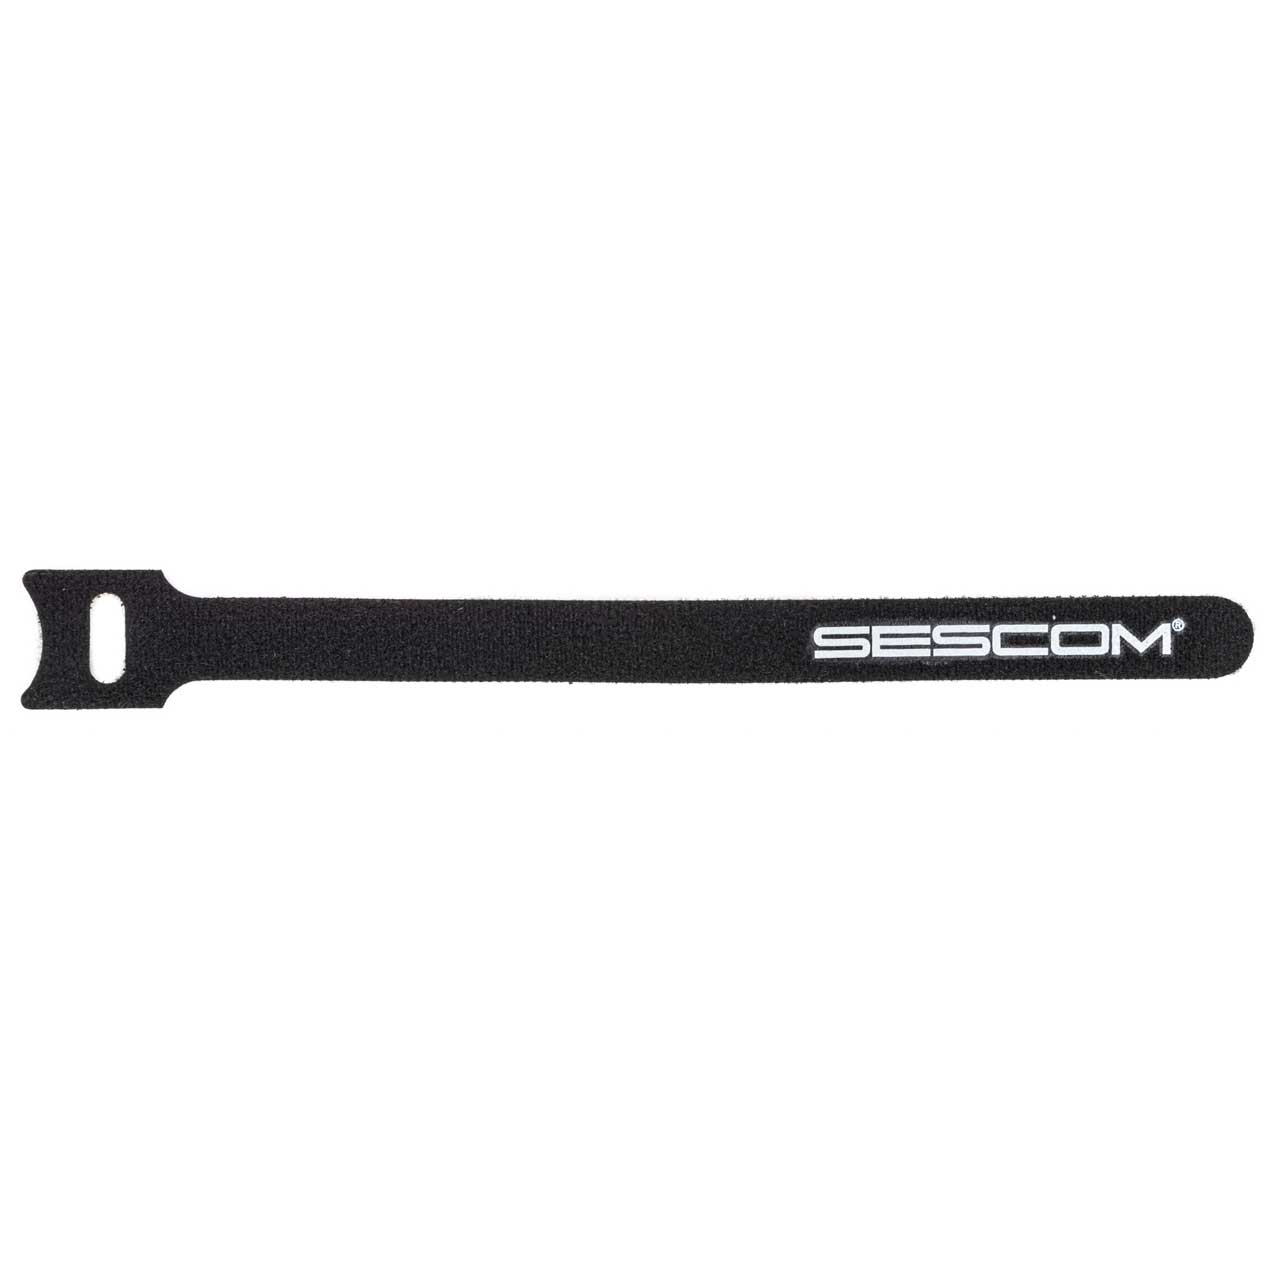 Sescom Hook and Loop Cable Wrap 12mm x 180mm Black with White Logo - 10 Pack SES-HKNLP-10PK